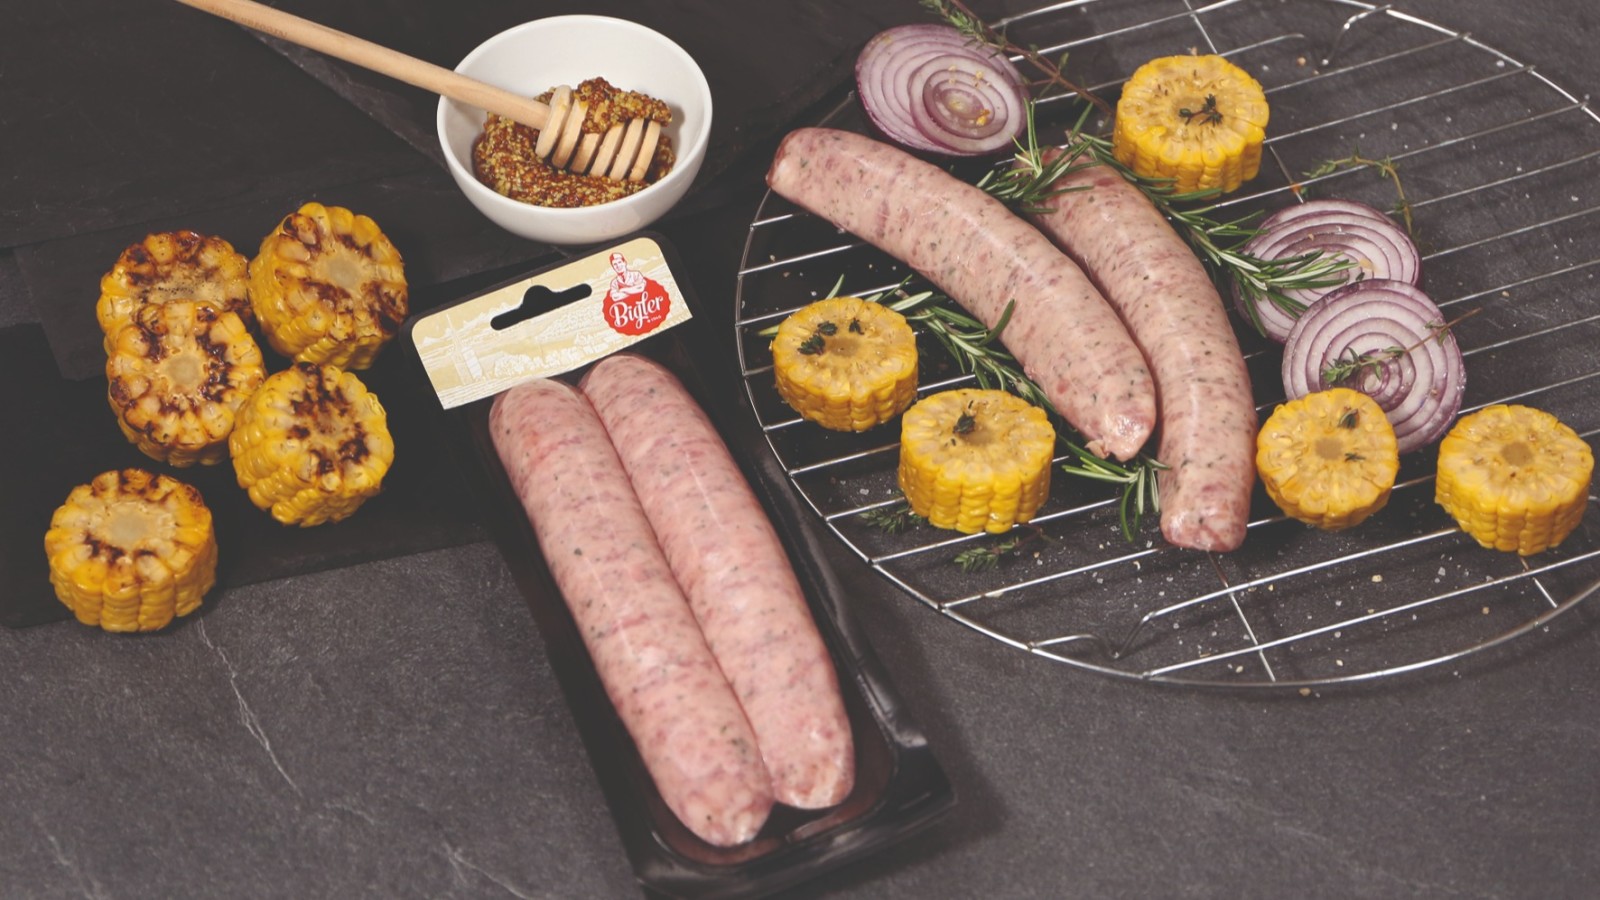 Thermoskin from Nemco is the perfect solution for highlighting the product in the refrigerated display. We have a wide range of sausages, meats, and salami packaging, several of which are reusable or plastic-reduced skin pack products.